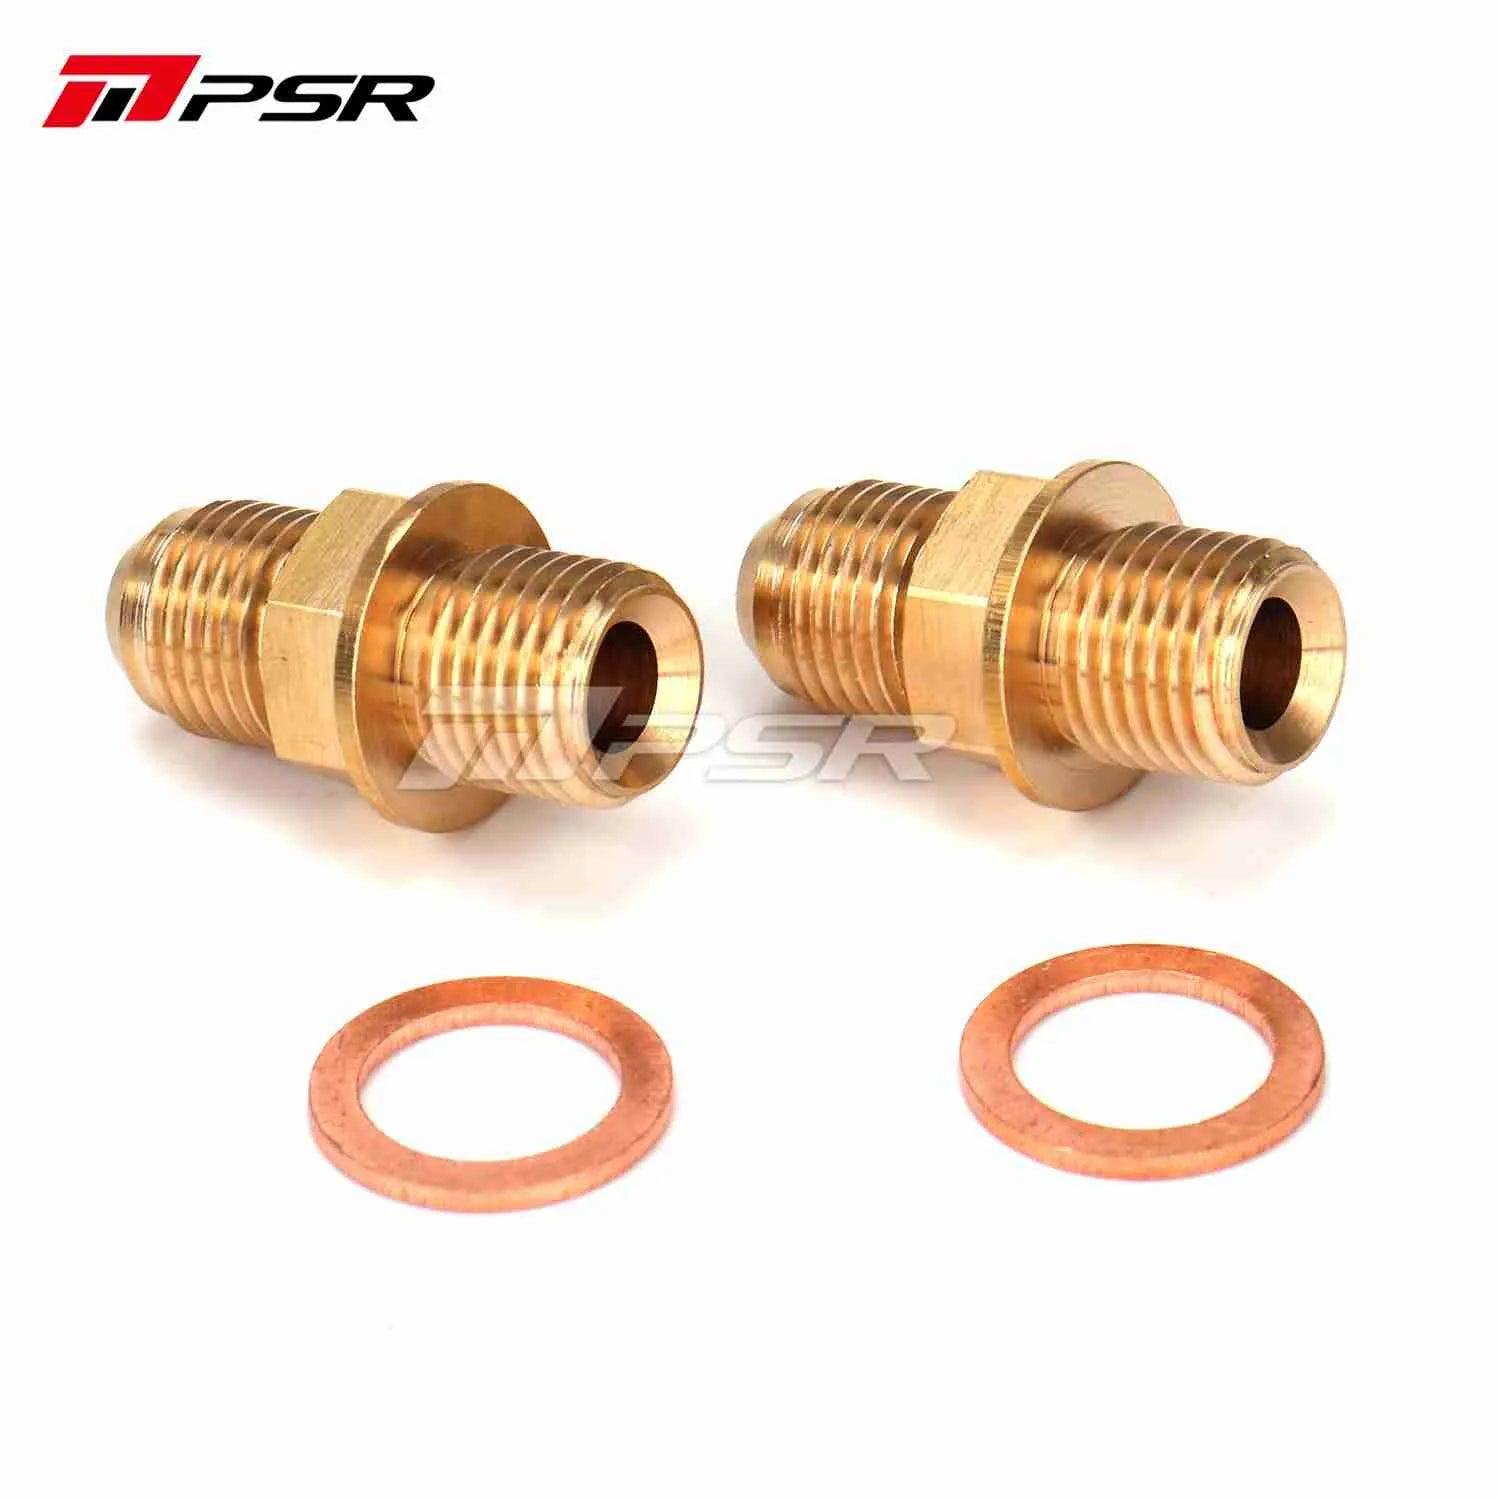 Pulsar Turbo Water Cooling Fitting Kit -6 AN for PT/X28 PT/X30 PT/X35 GEN I/II PSR3584 GEN2 PTG25 PTG30 PTG35 PTG42 - Prolink Performance